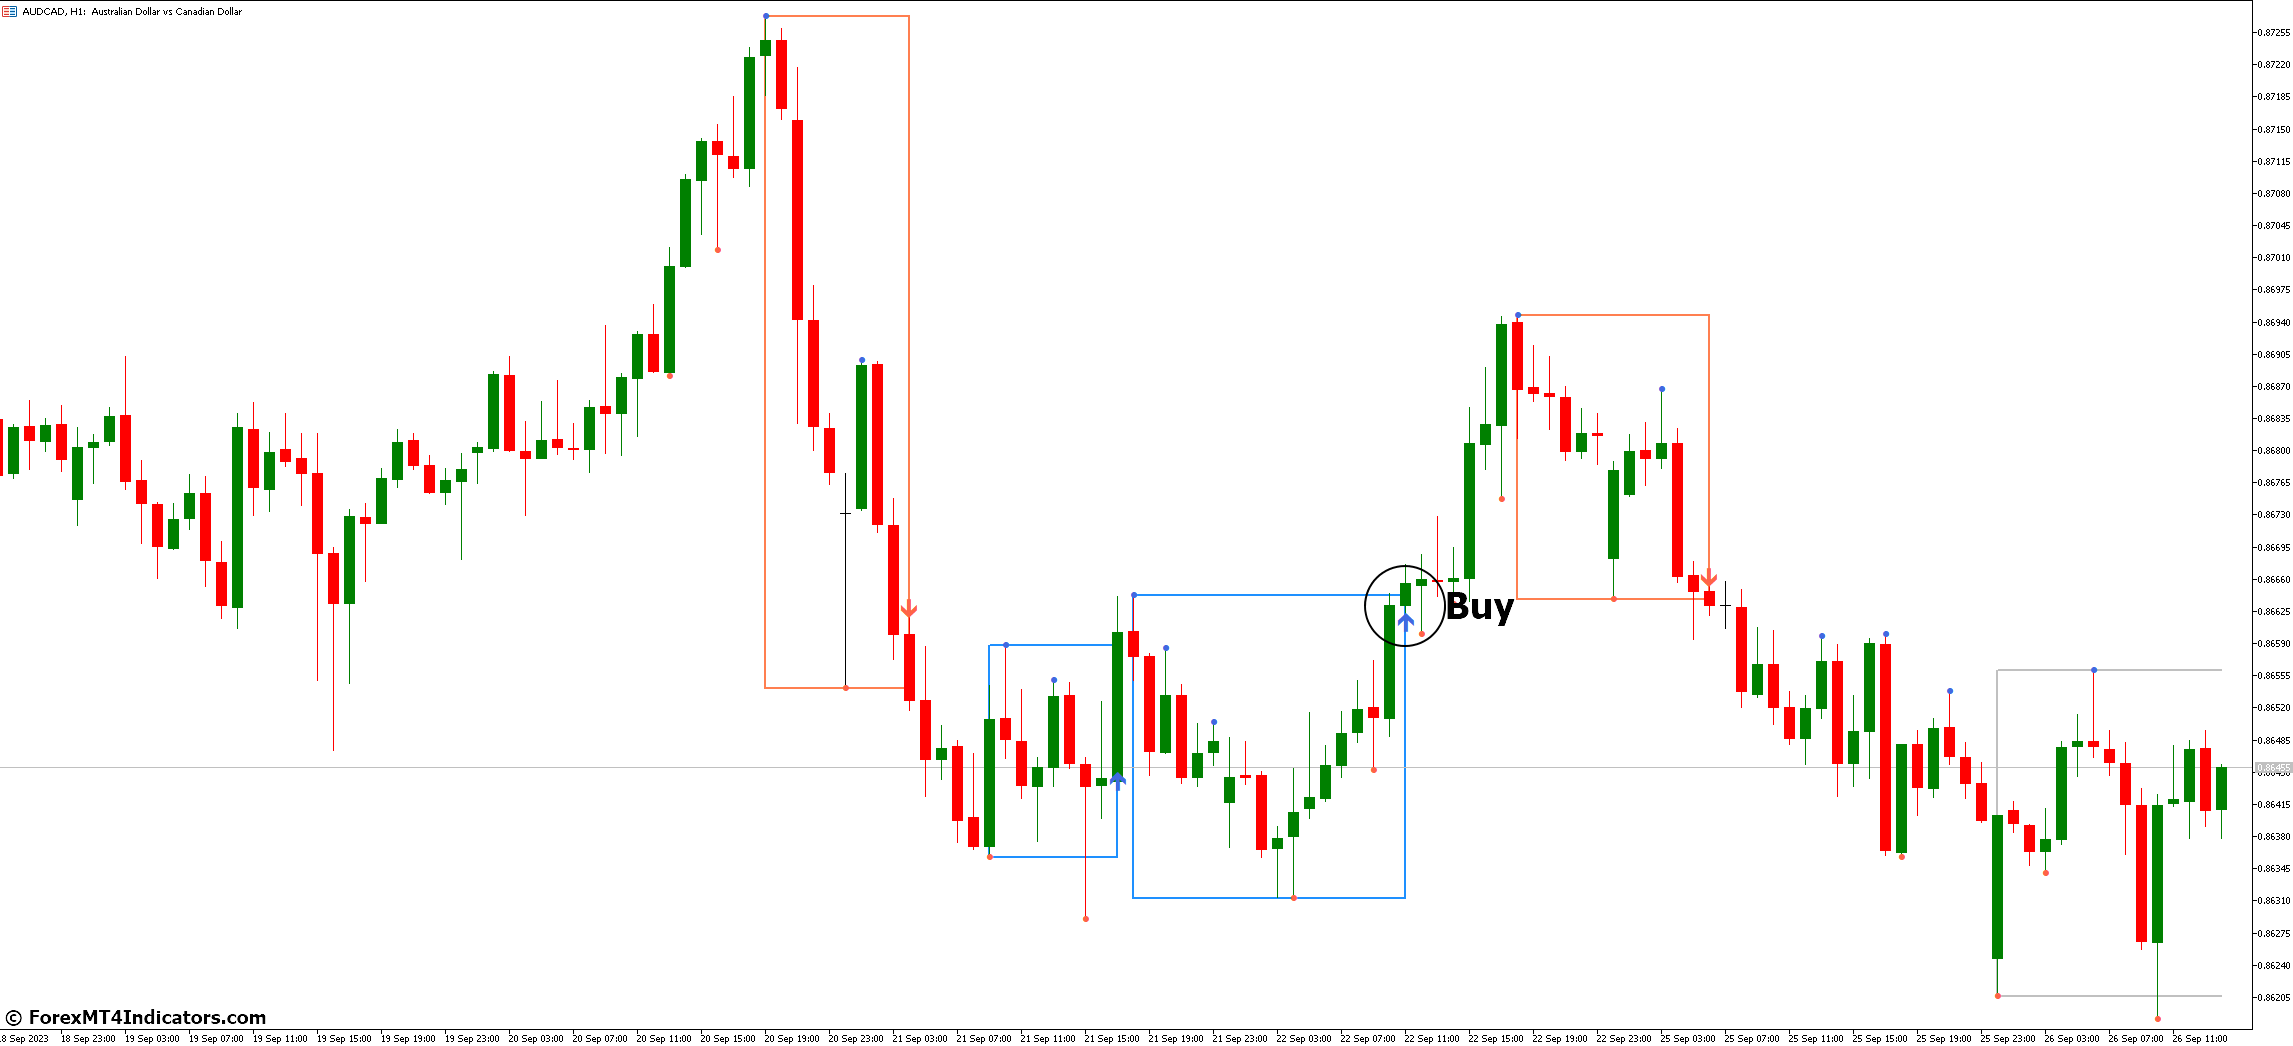 How to Trade with Darvas Boxes NMC MT5 Indicator - Buy Entry